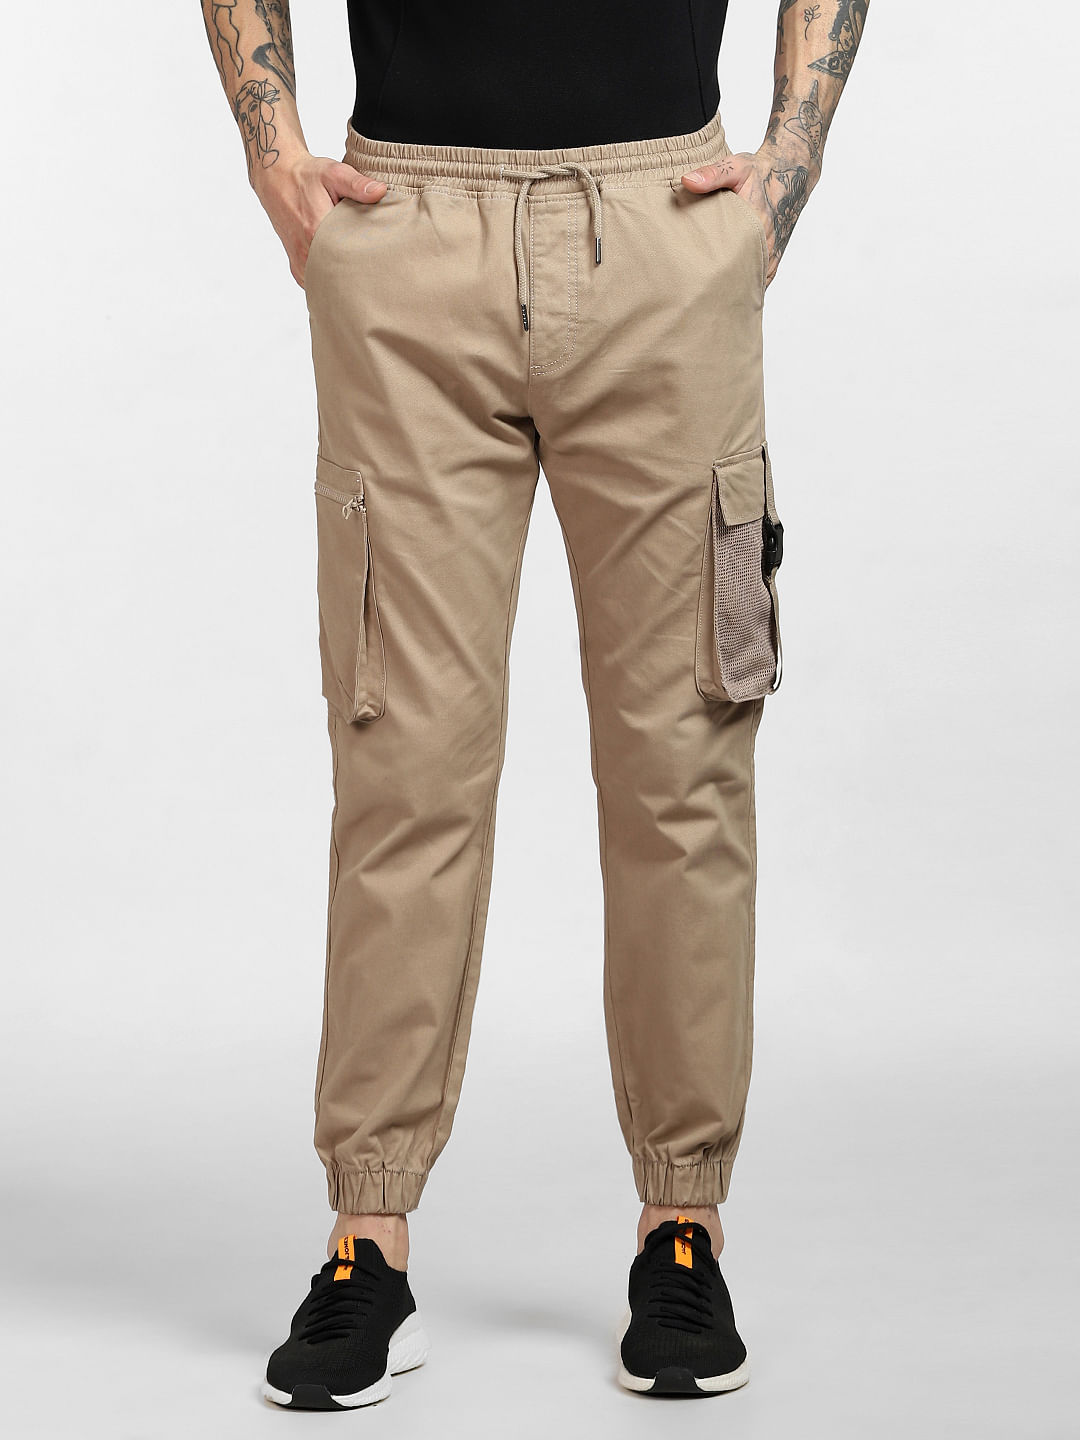 Stylish  Comfy Mens Cargo Pants Comfortable Fit Cargo Pant Cargos With Waist  Belt